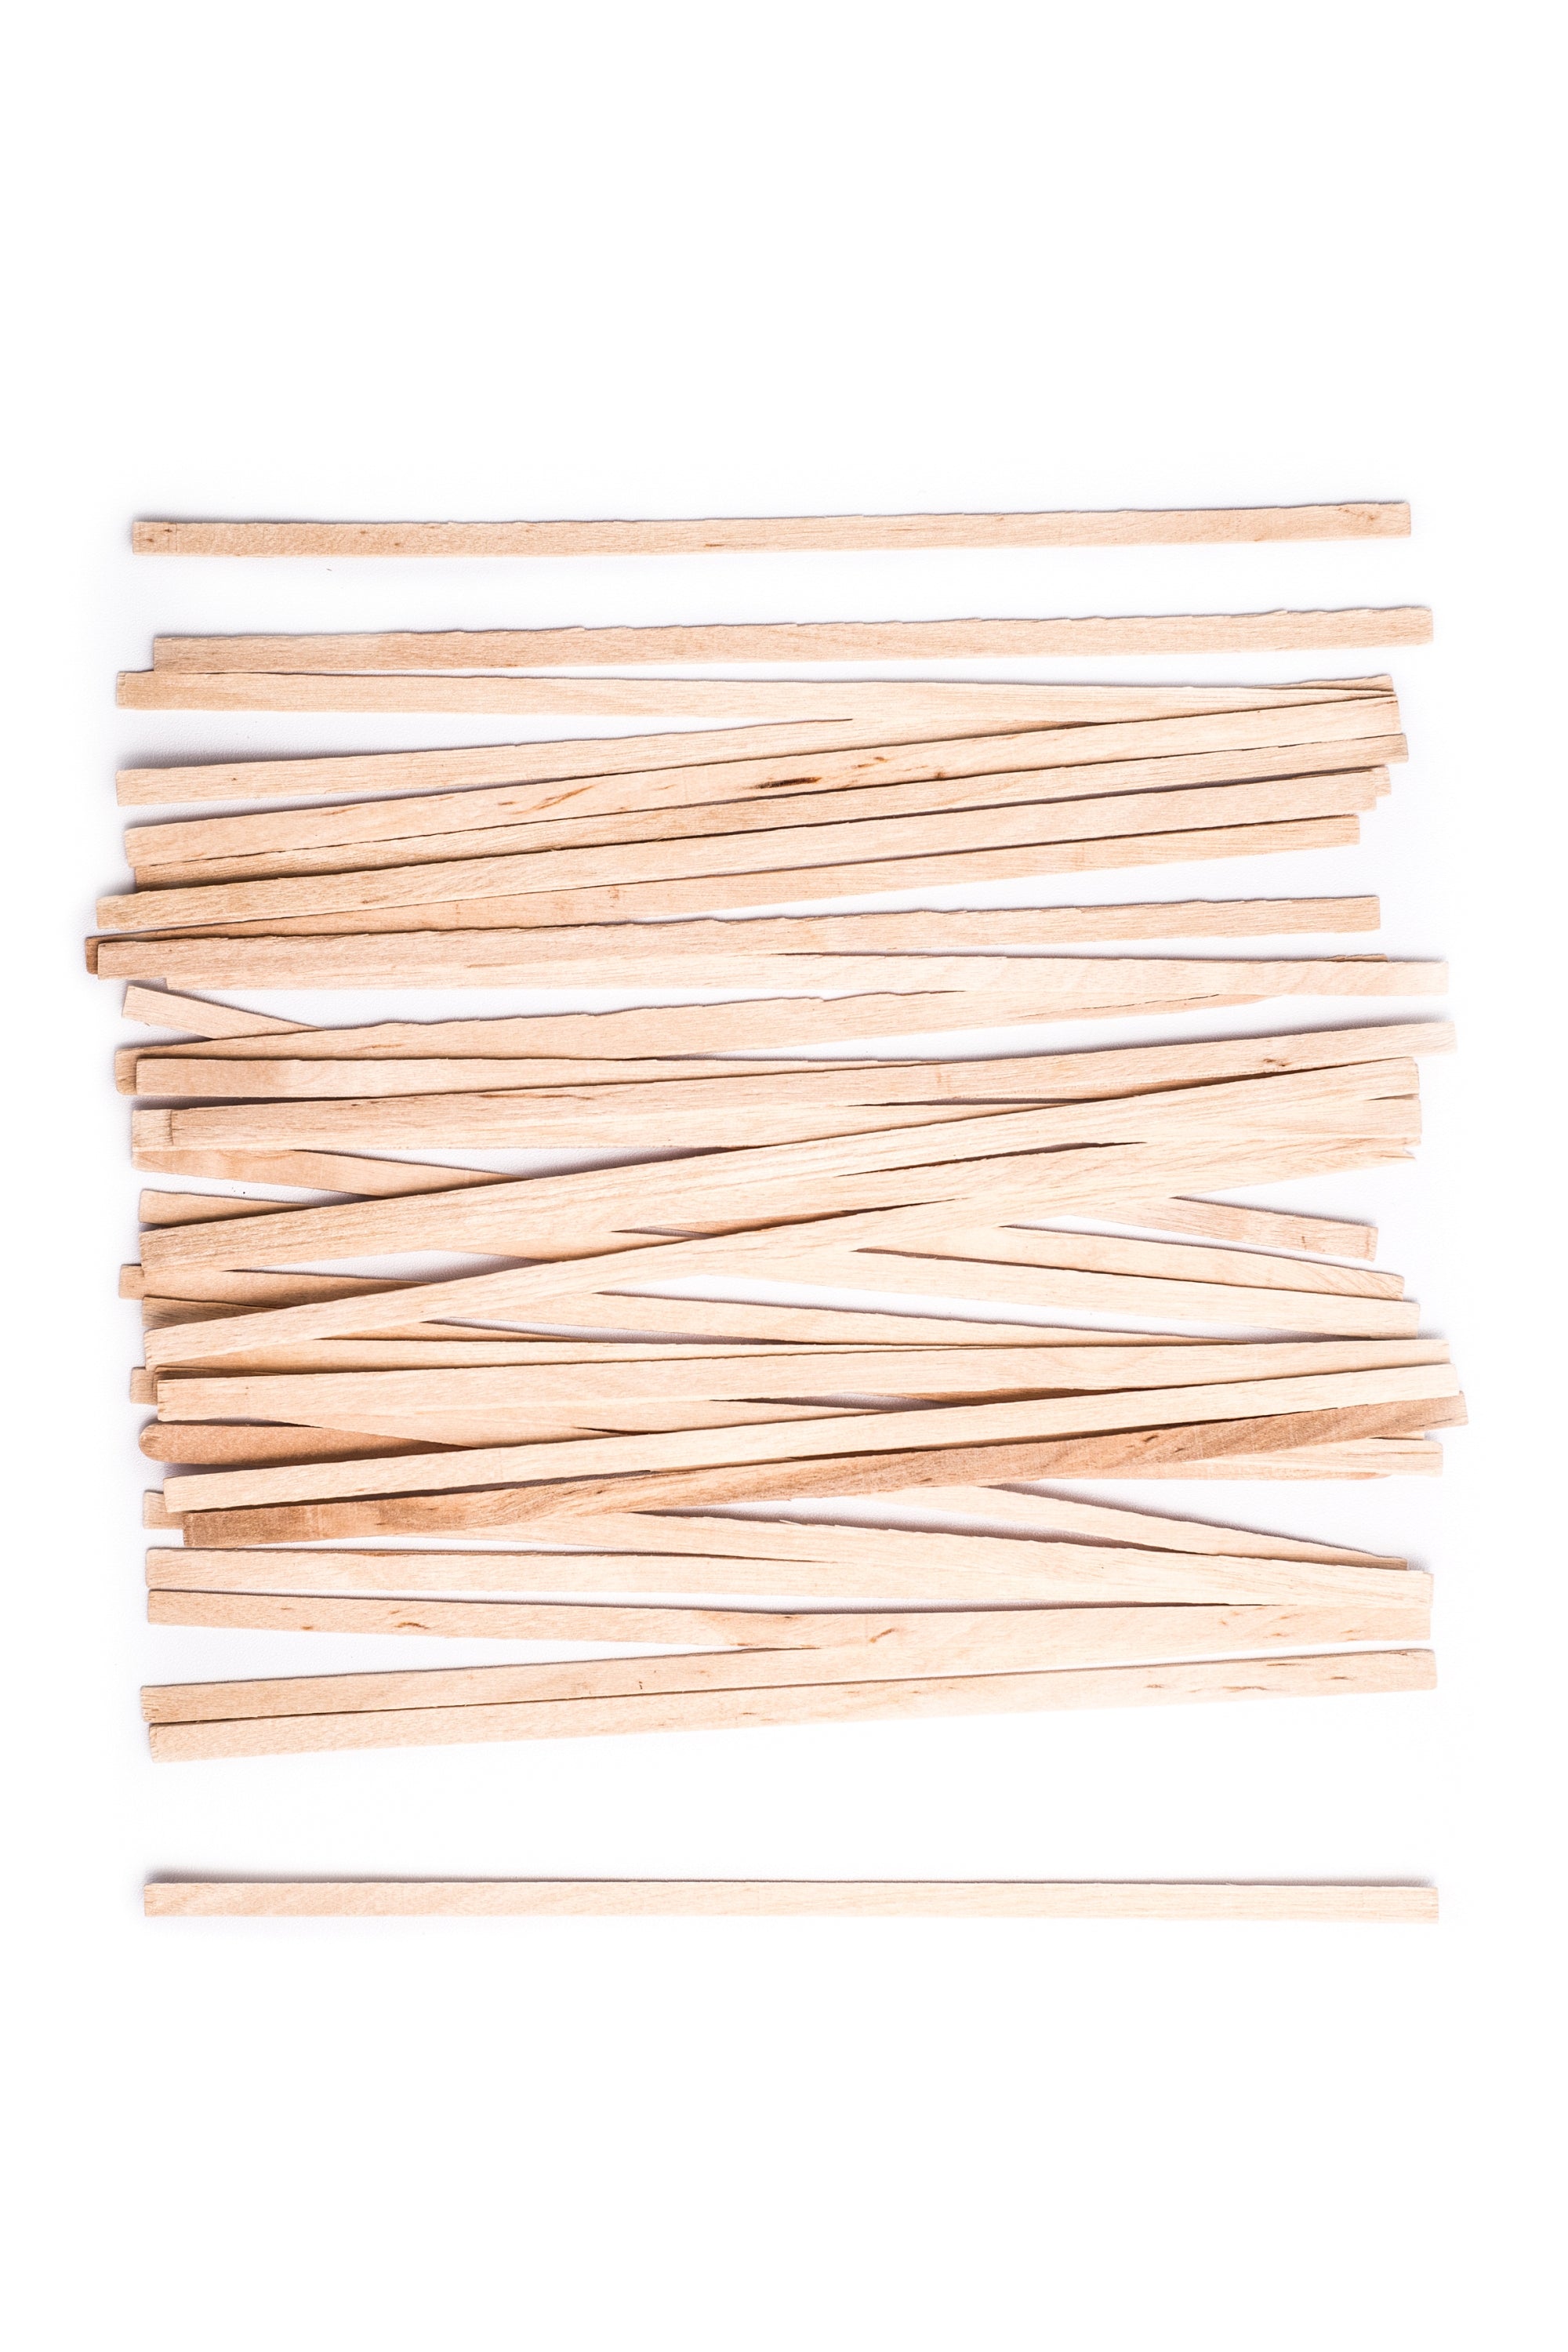 WoodU Disposable Wooden Coffee Stirrer Square Edge 1000 pcs All Natural Eco-friendly Non-toxic